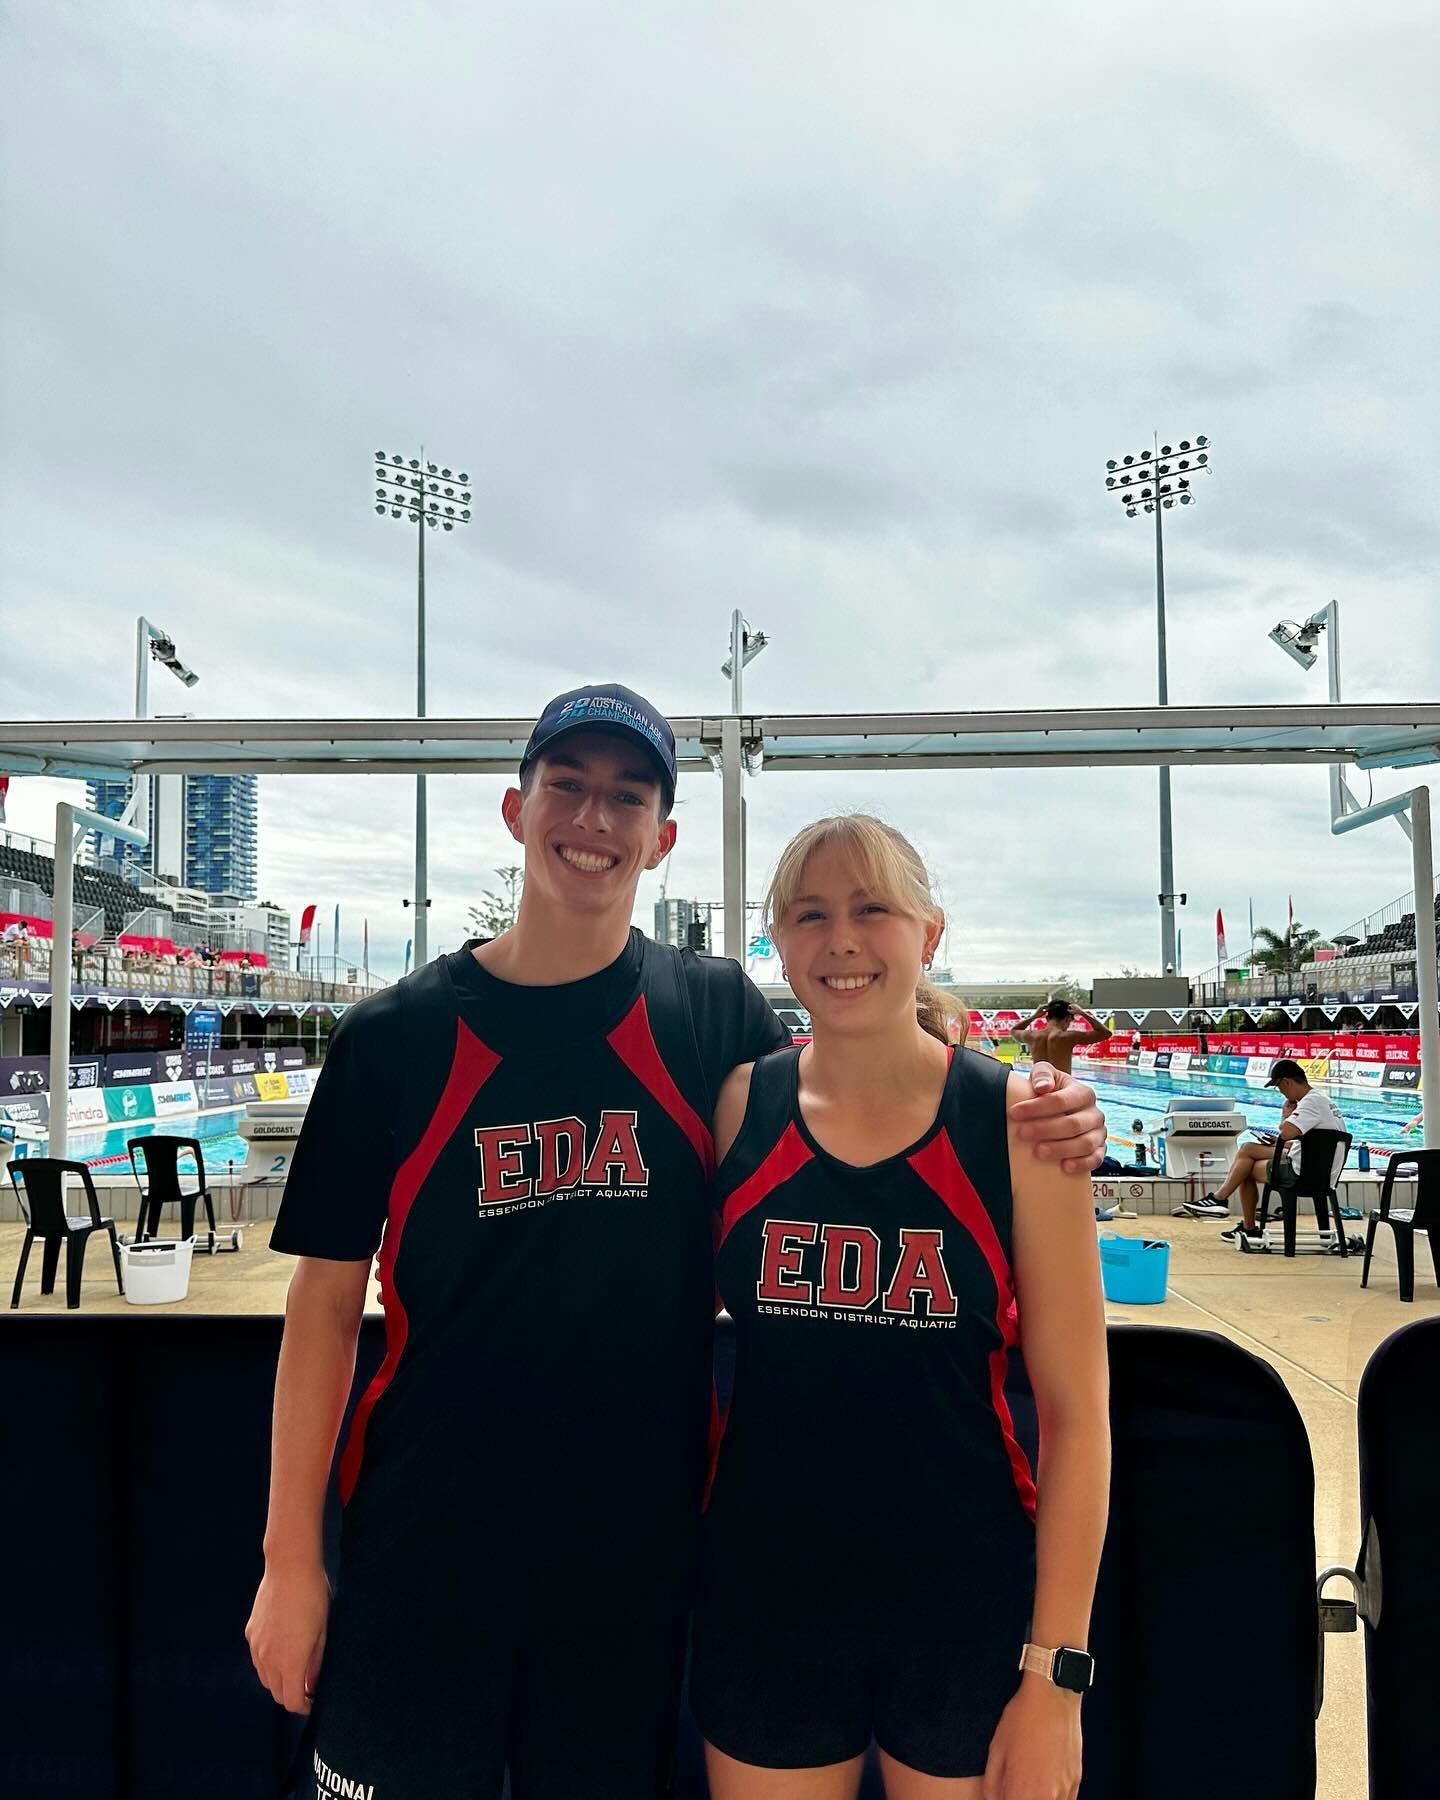 Australian Age Championships
&bull;
Indy, Josh &amp; Alan were all in action on day 4 in the 50m Backstroke and Butterfly. All three put in solid performances to hit the wall on their PB&rsquo;s. 
In the night 4 Finals session we had the Girls 13-14y